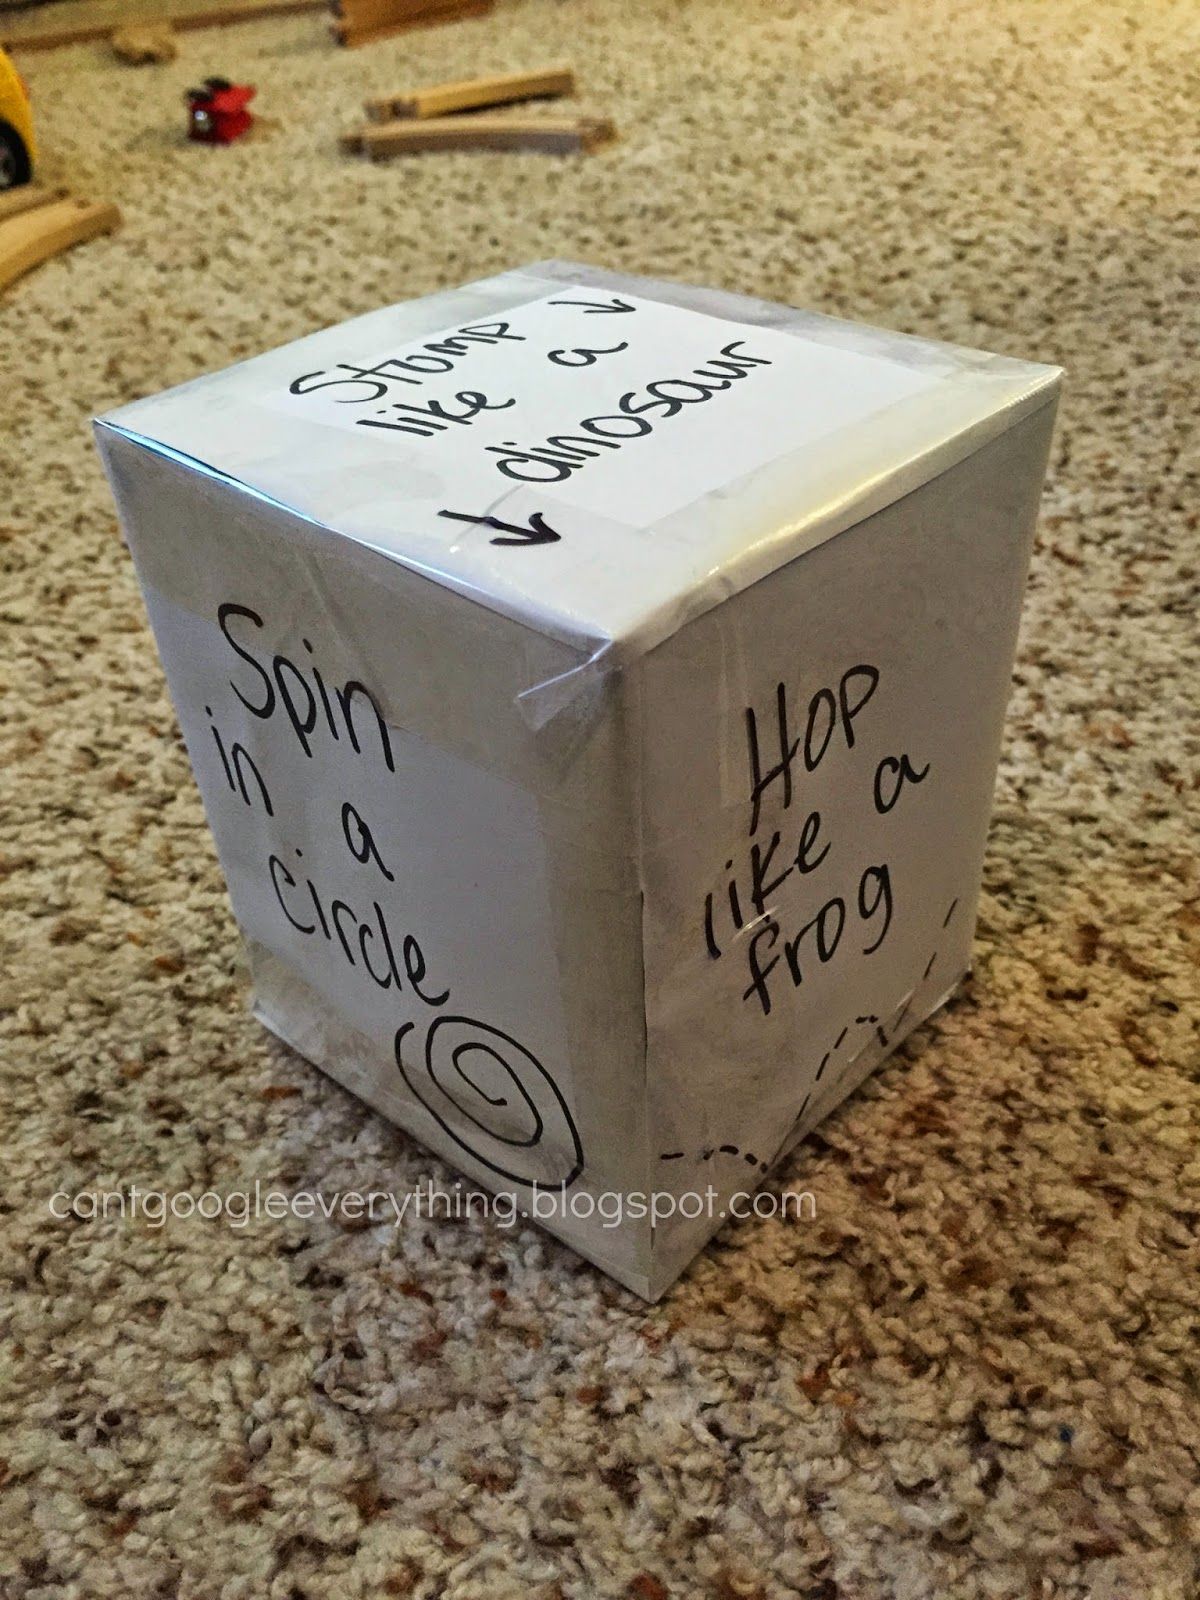 Rainy Day Fun!  Create an activity dice for your active toddler or preschooler to play with!